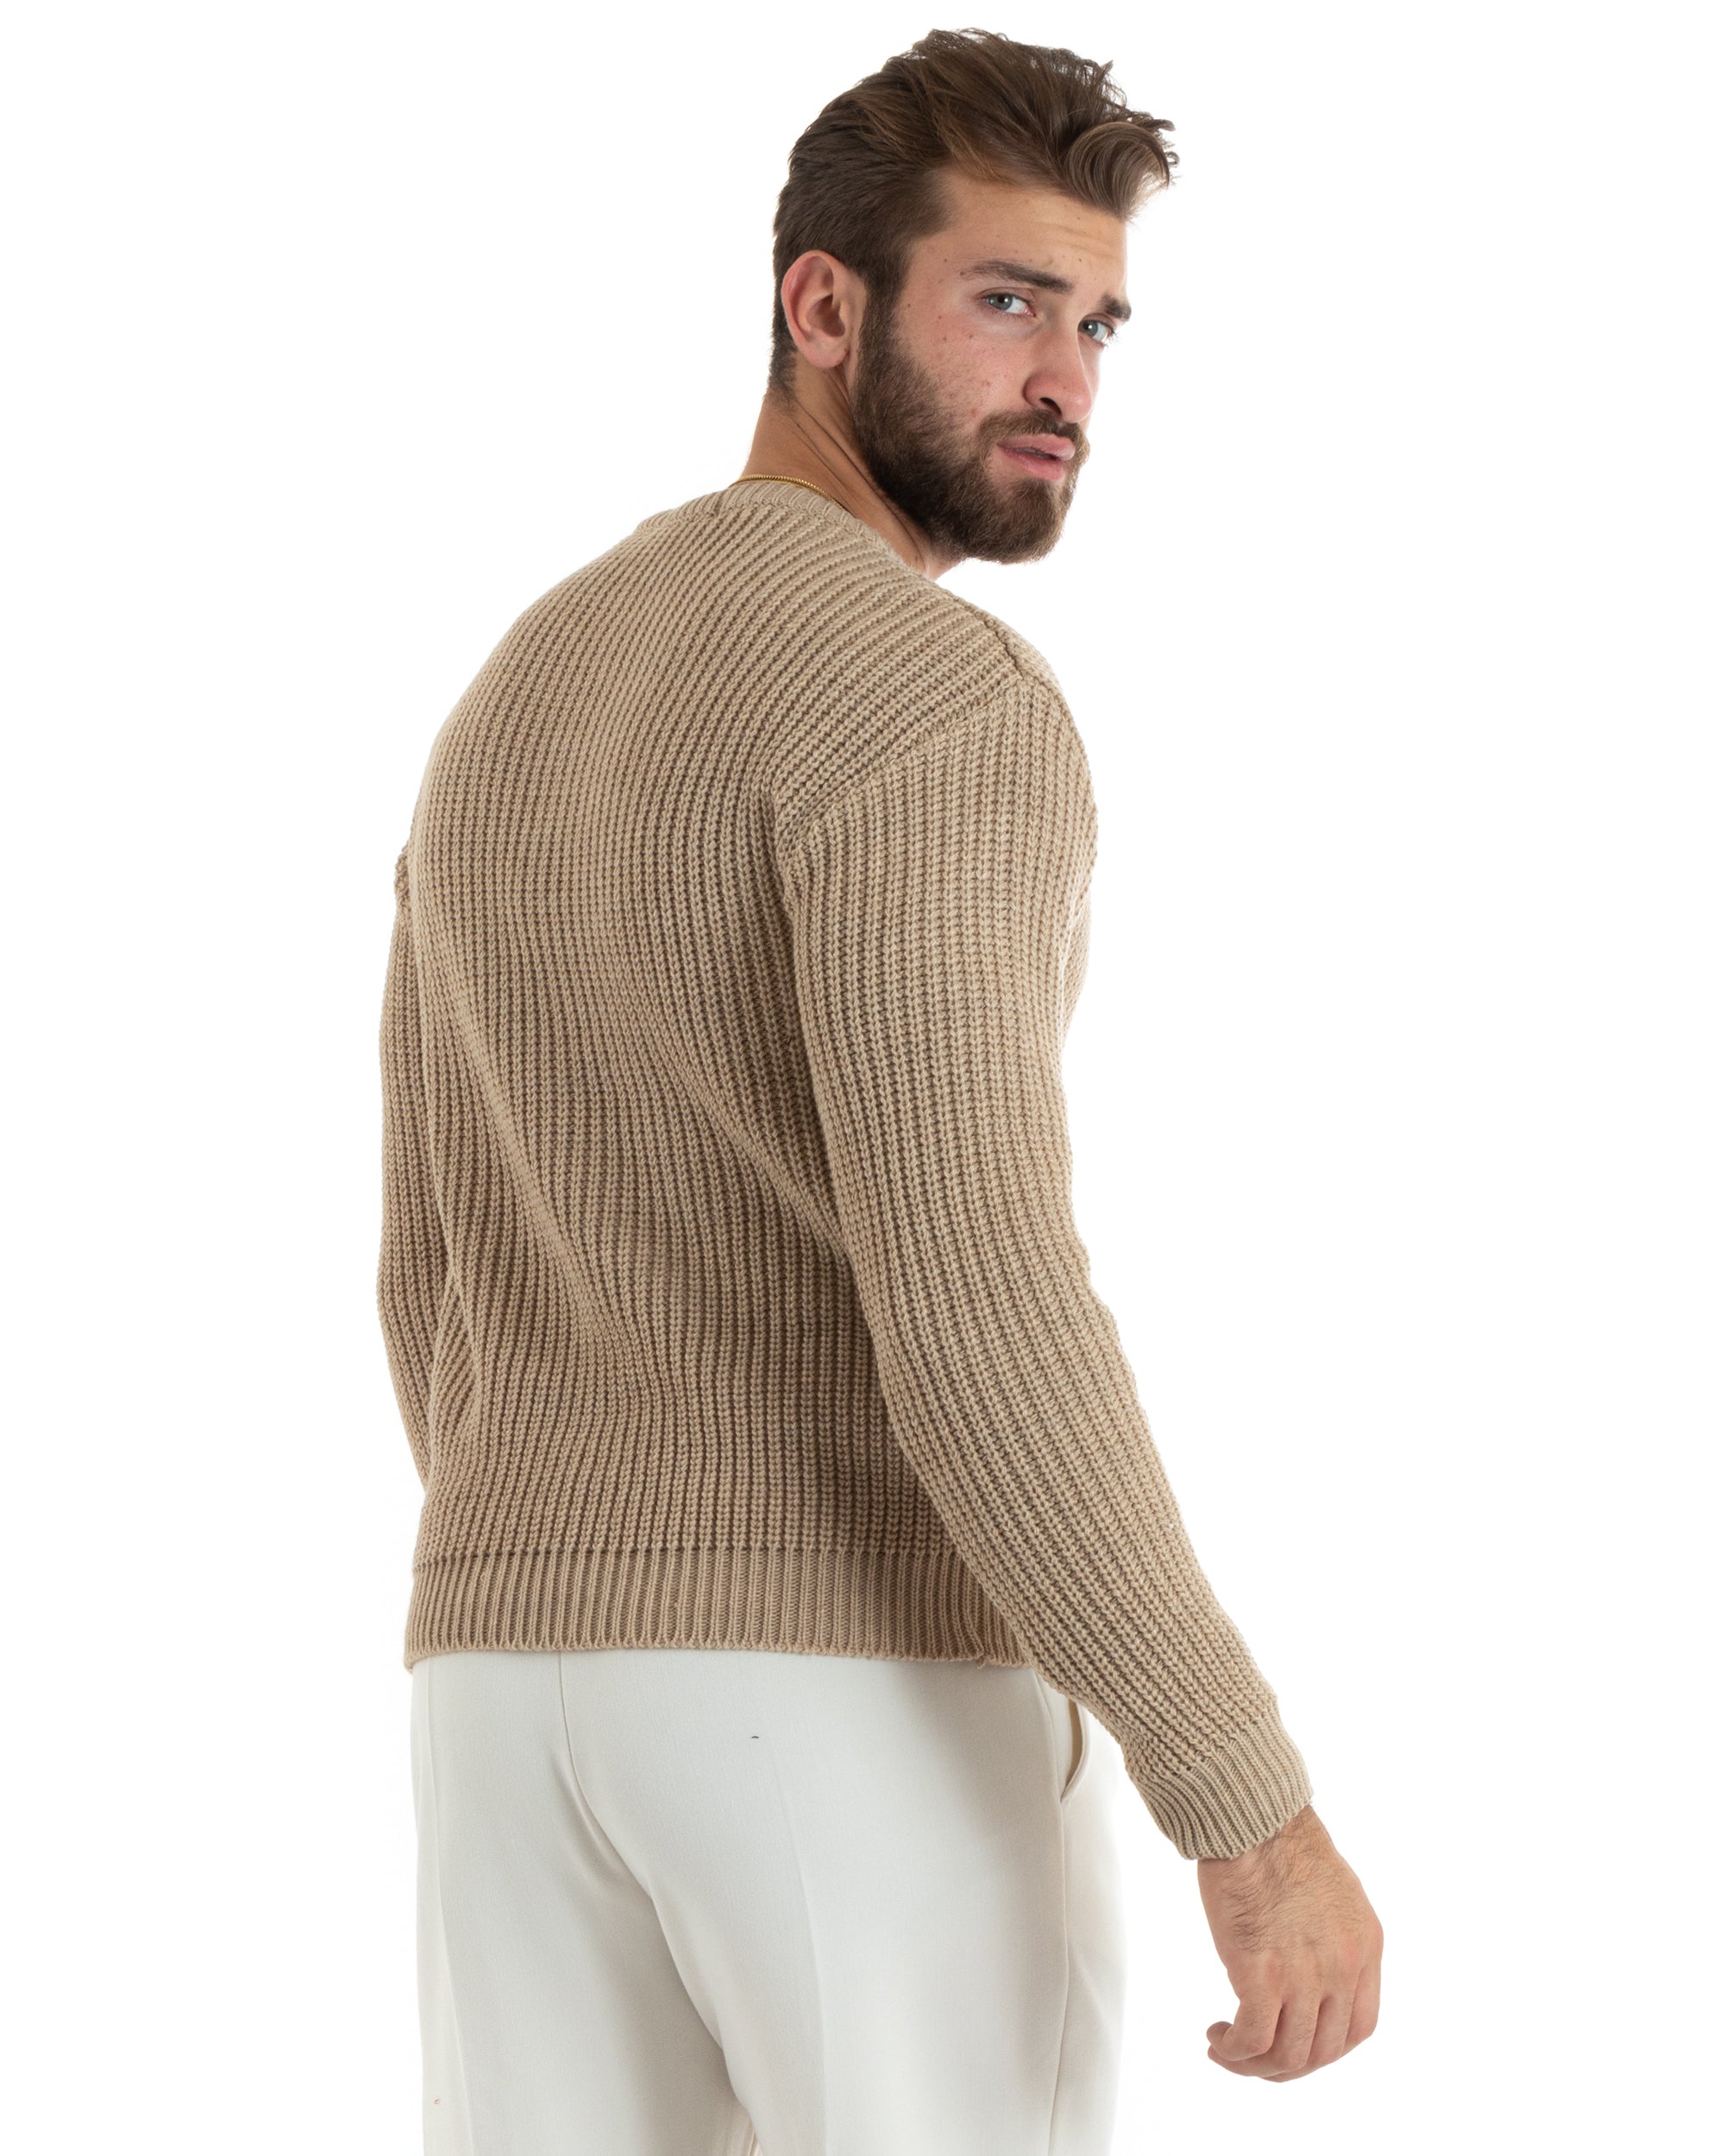 Paul Barrell Men's Pullover Sweater Solid Color Beige Crewneck Casual GIOSAL M2359A